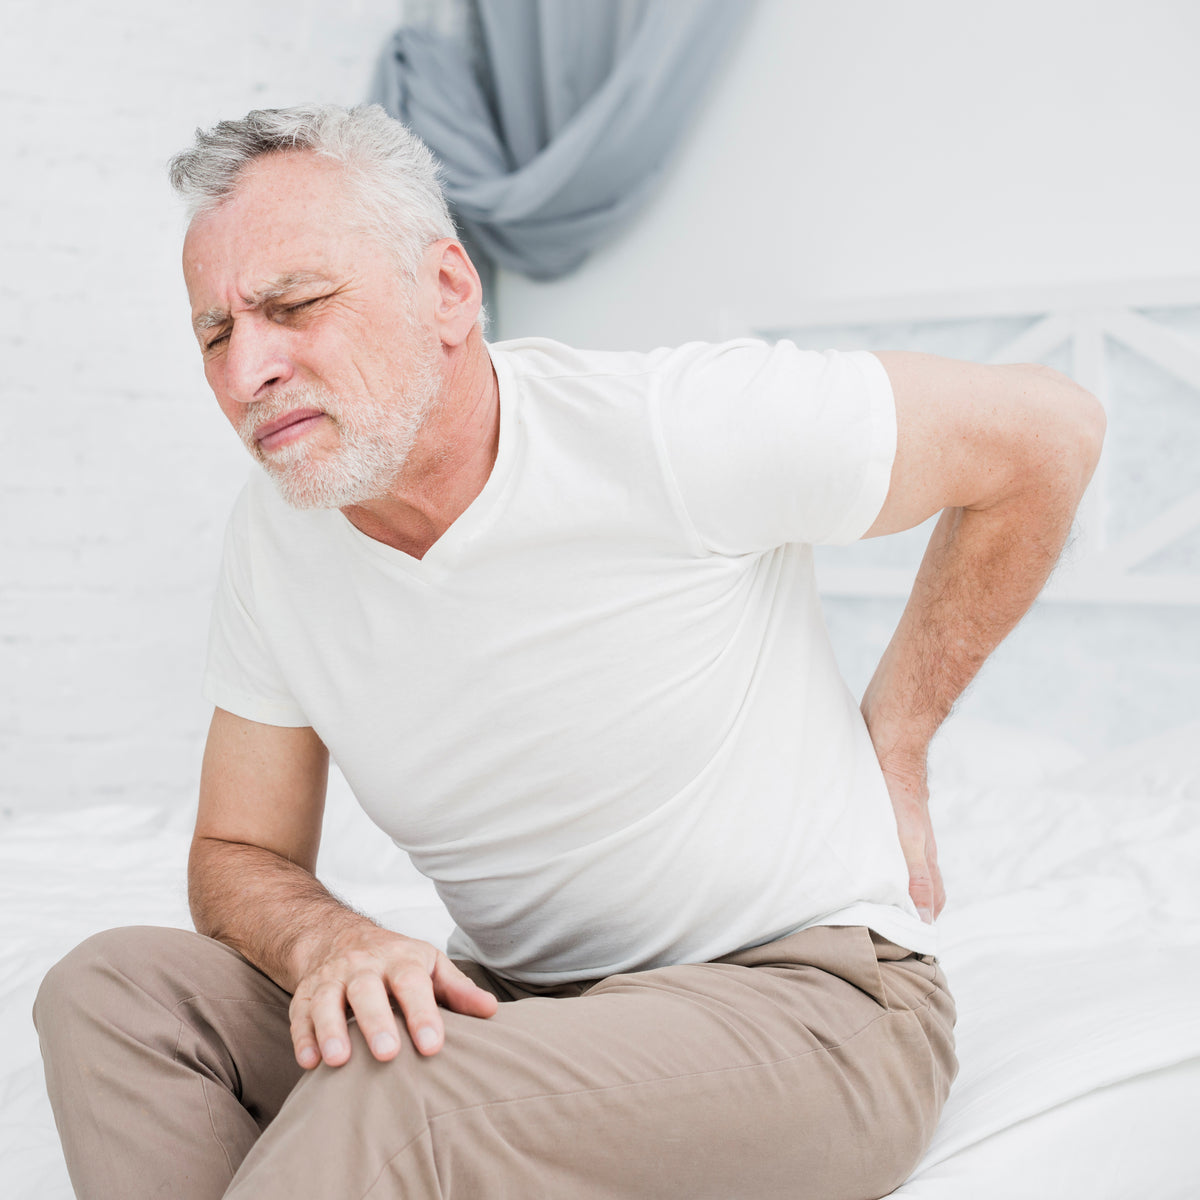 A man in bed with back pain